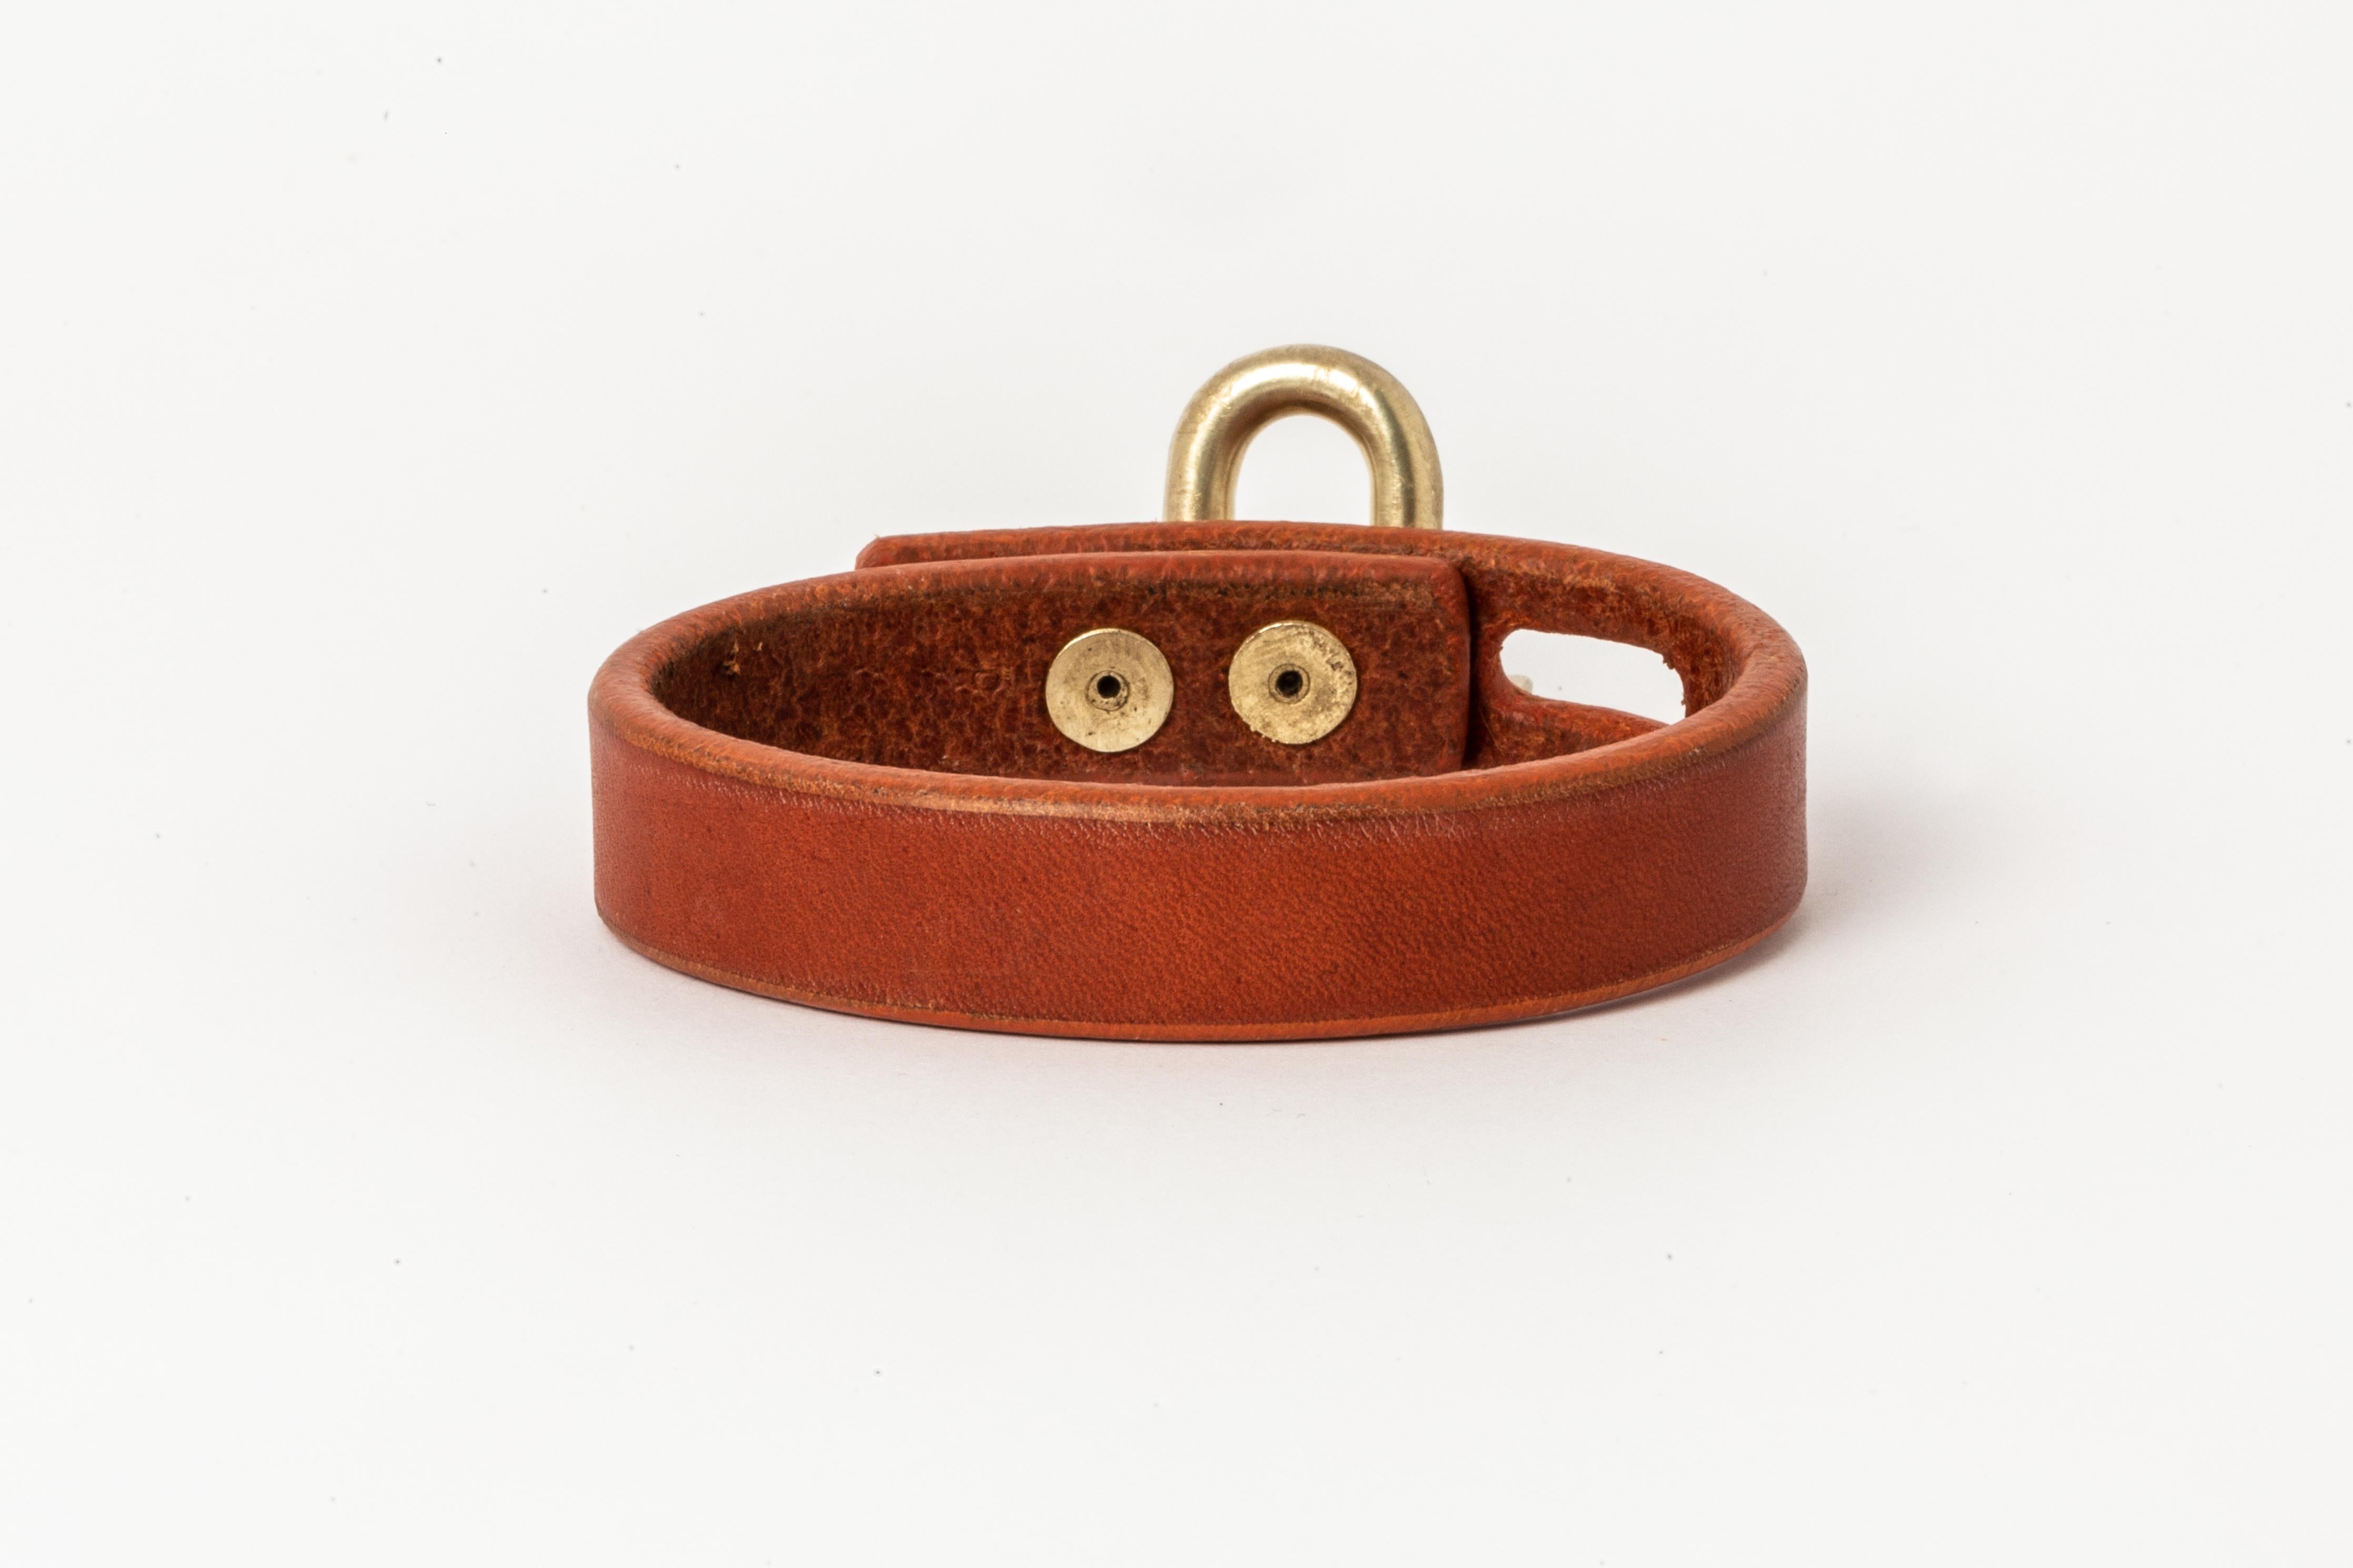 Bracelet in alezan buffalo leather and acid treated gold plated brass. Items with the potential use as restraints. All P4X hardware and accessories are compatible and interchangeable. The Charm System is an interrelated group of products that can be